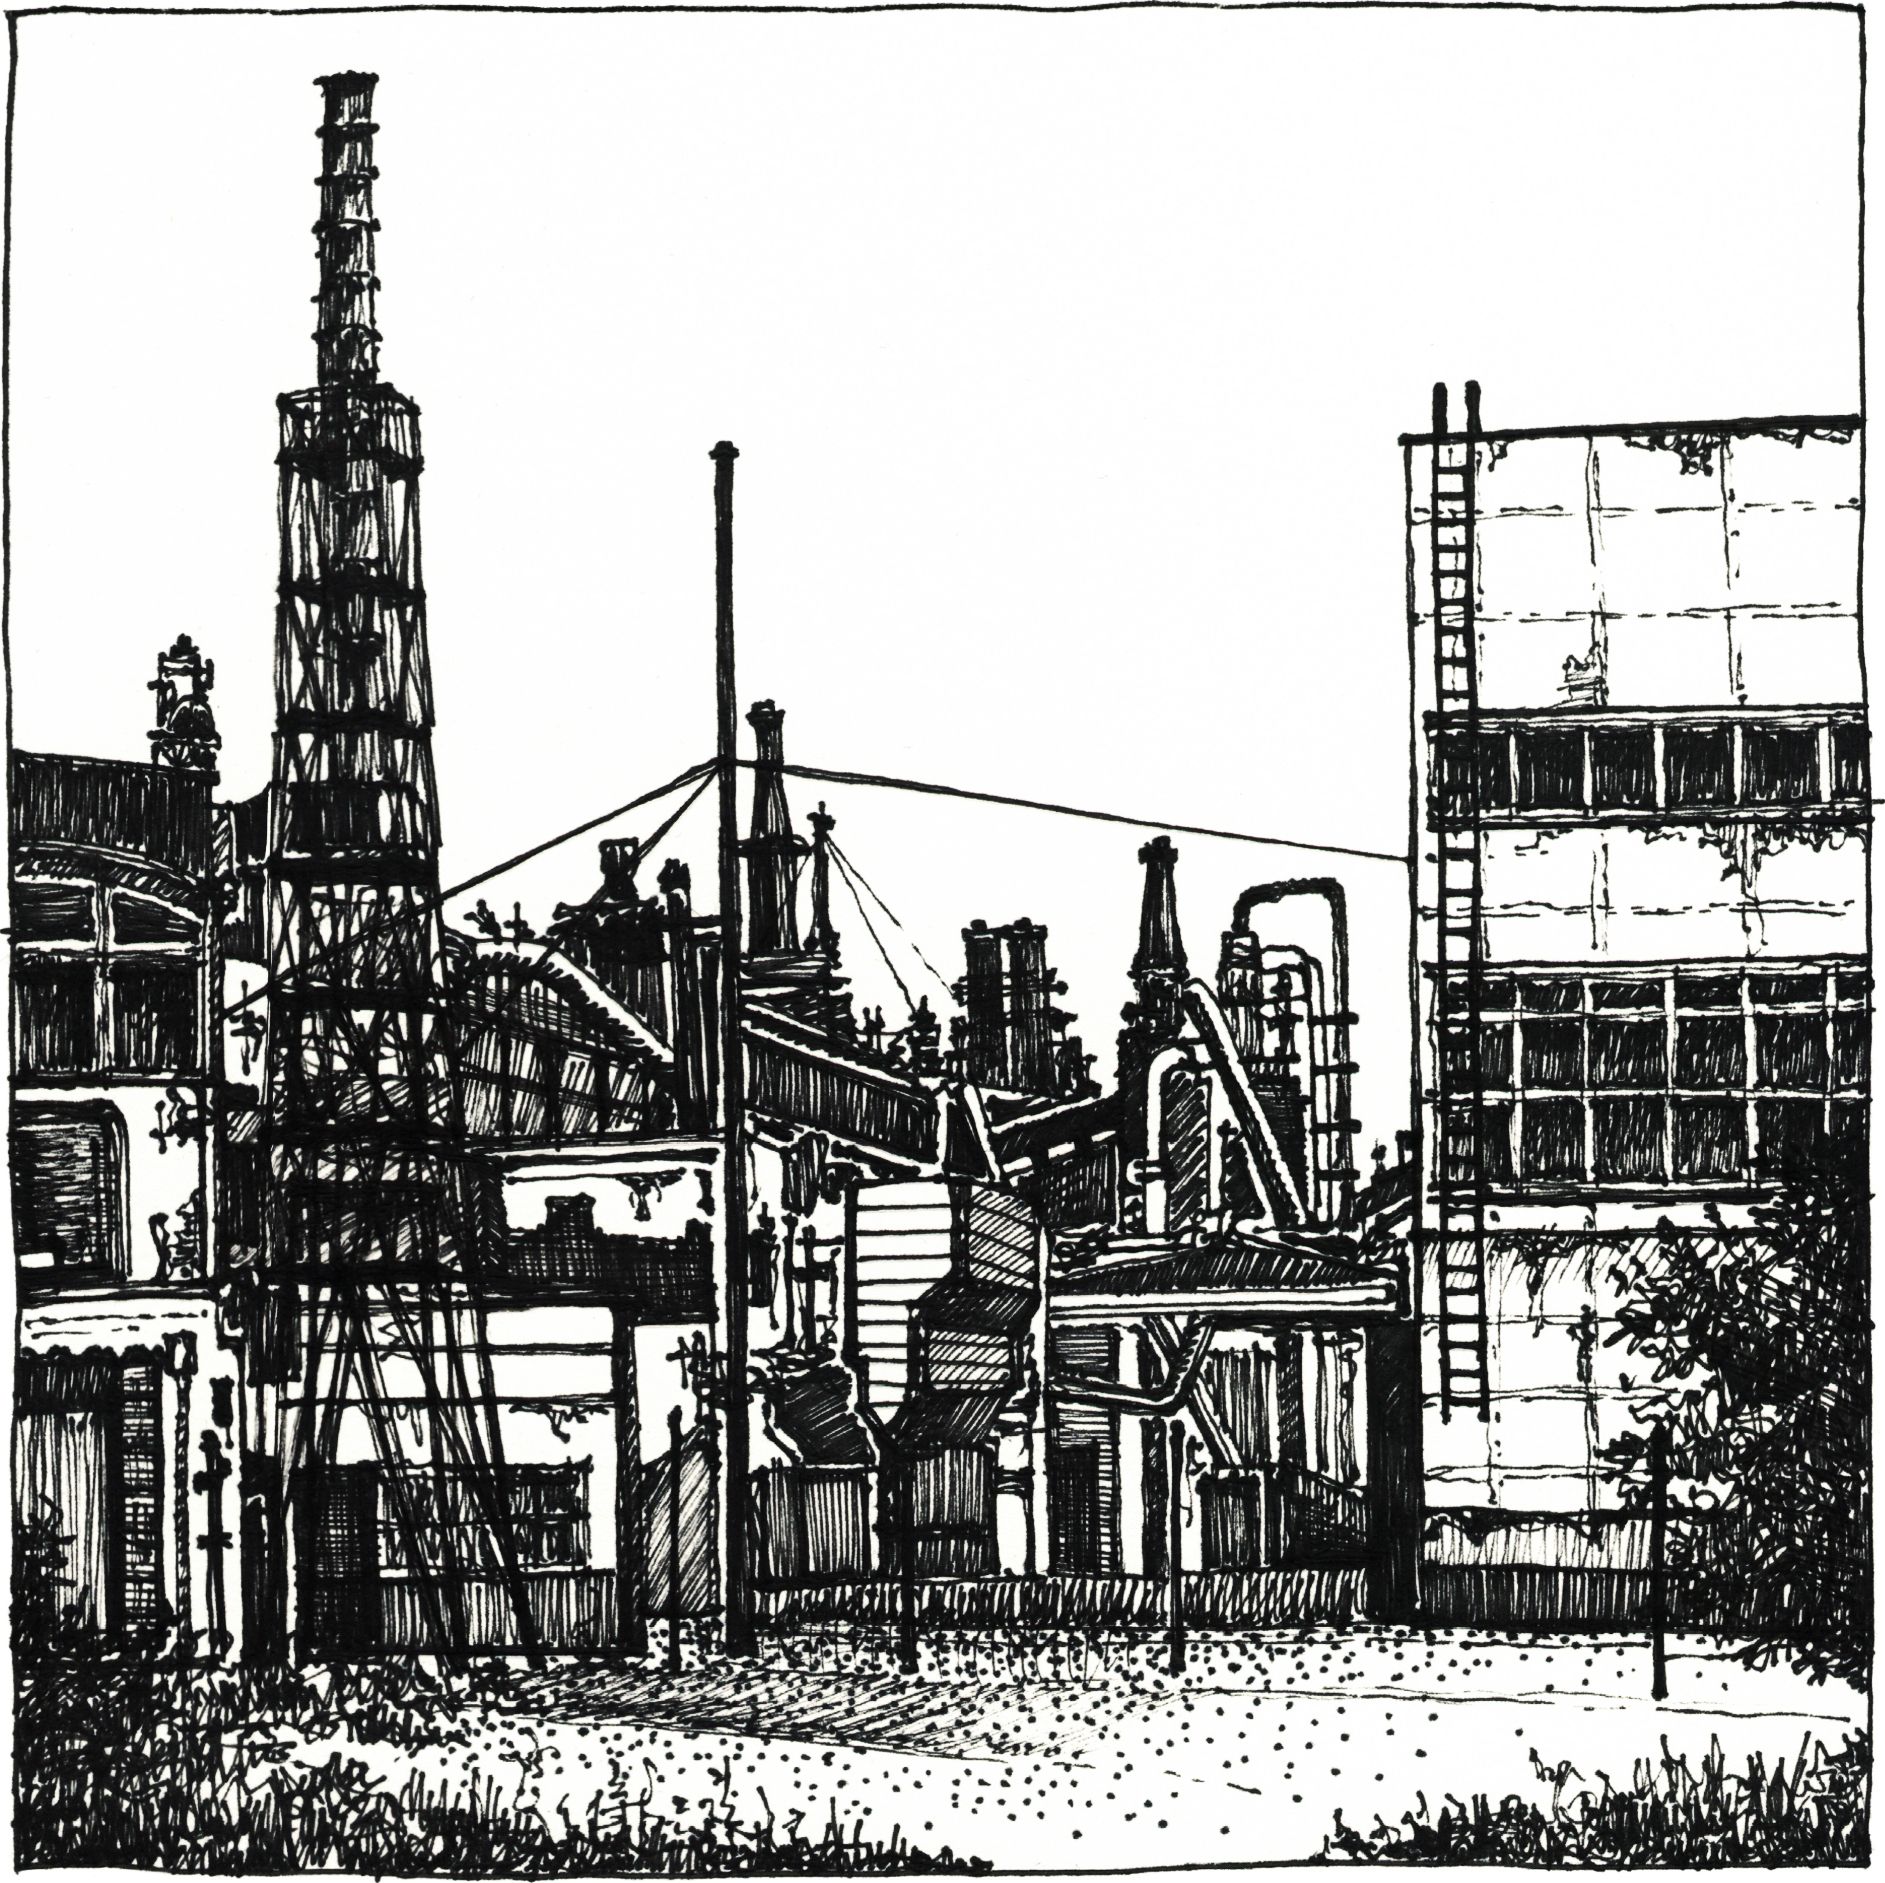 Paper Factory - Drawing by Camillo Visini